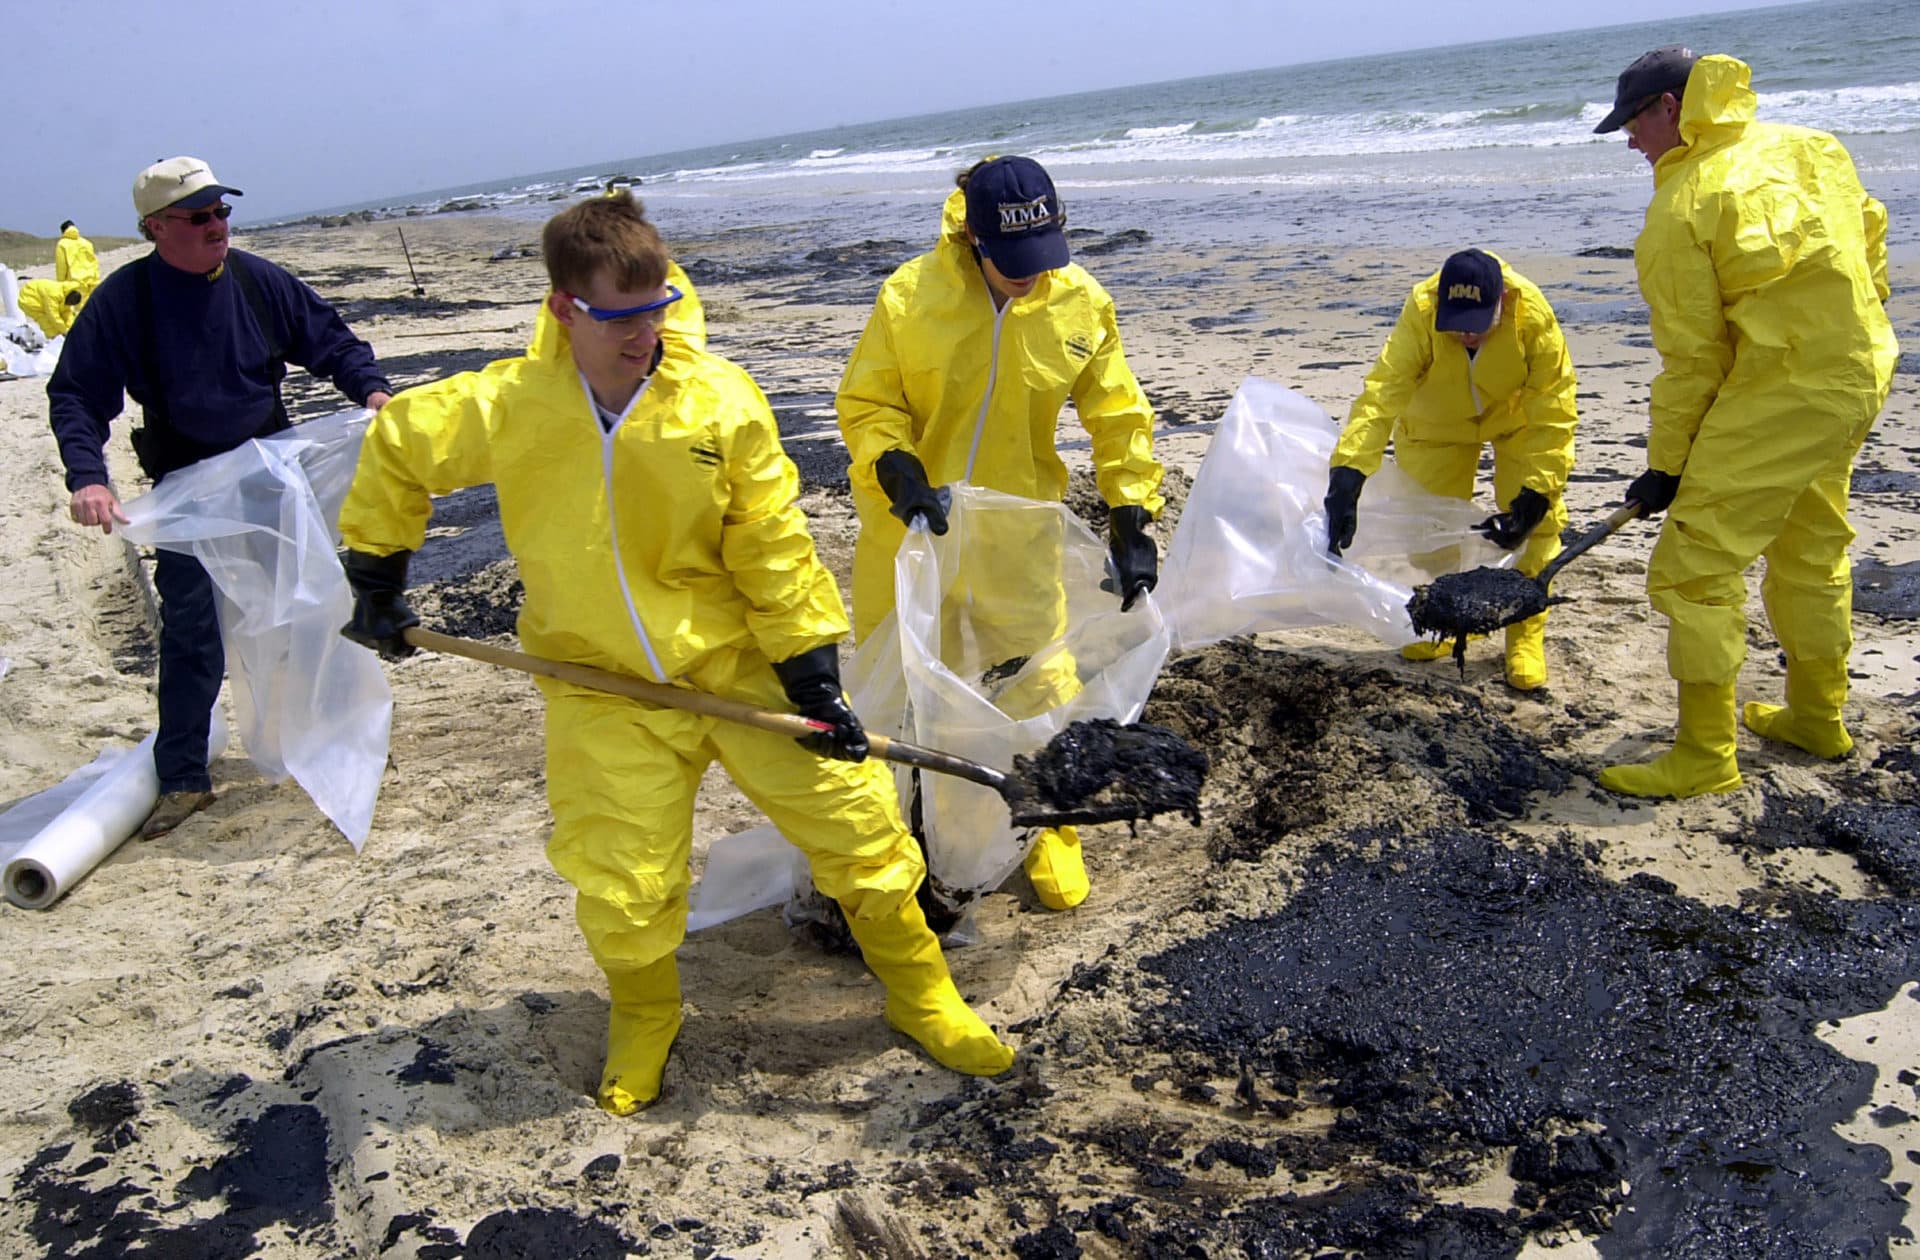 DARTMOUTH, MA - April 29: Personnel with Clean Harbors Inc. remove oil from Barneys Joy beach April 28, 2003 in Dartmouth, Massachusetts. On April 27, 2003 an oil barge developed a leak in Buzzards Bay, spilling at least 14,000 gallons of #6 fuel oil into the bay. U.S. Coast Guard and environmental clean-up crews are attempting to contain the spill in coastal areas of southeastern Massachusetts and Rhode Island. (Photo by Douglas McFadd/Getty Images)